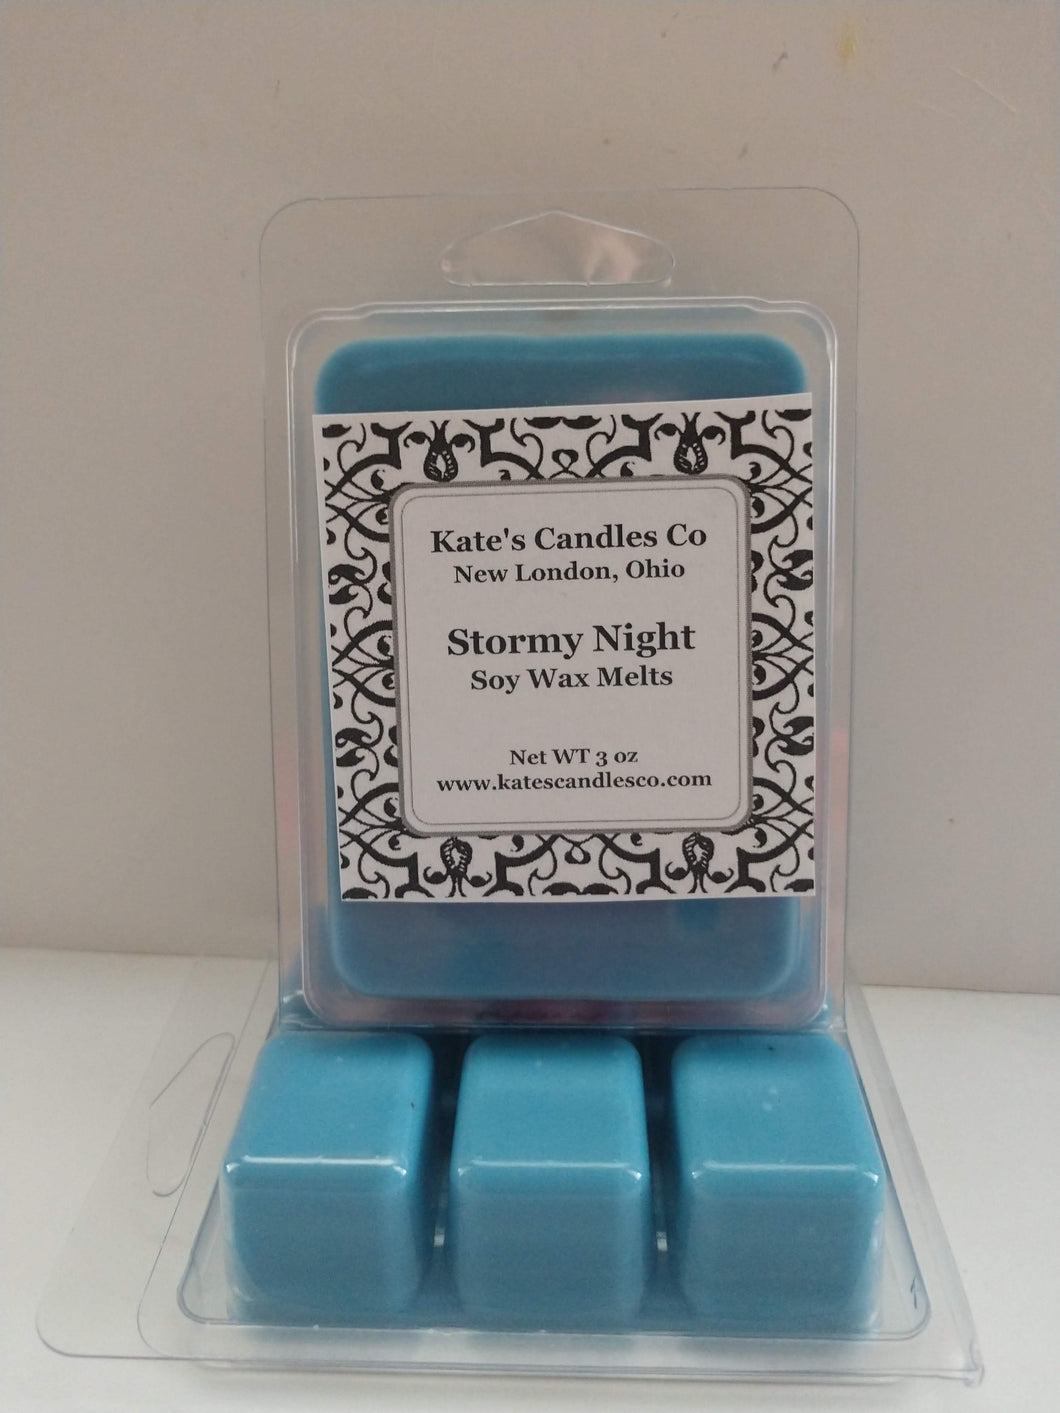 Stormy Night Soy Wax Melts - Kate's Candles Co. Soy Candles